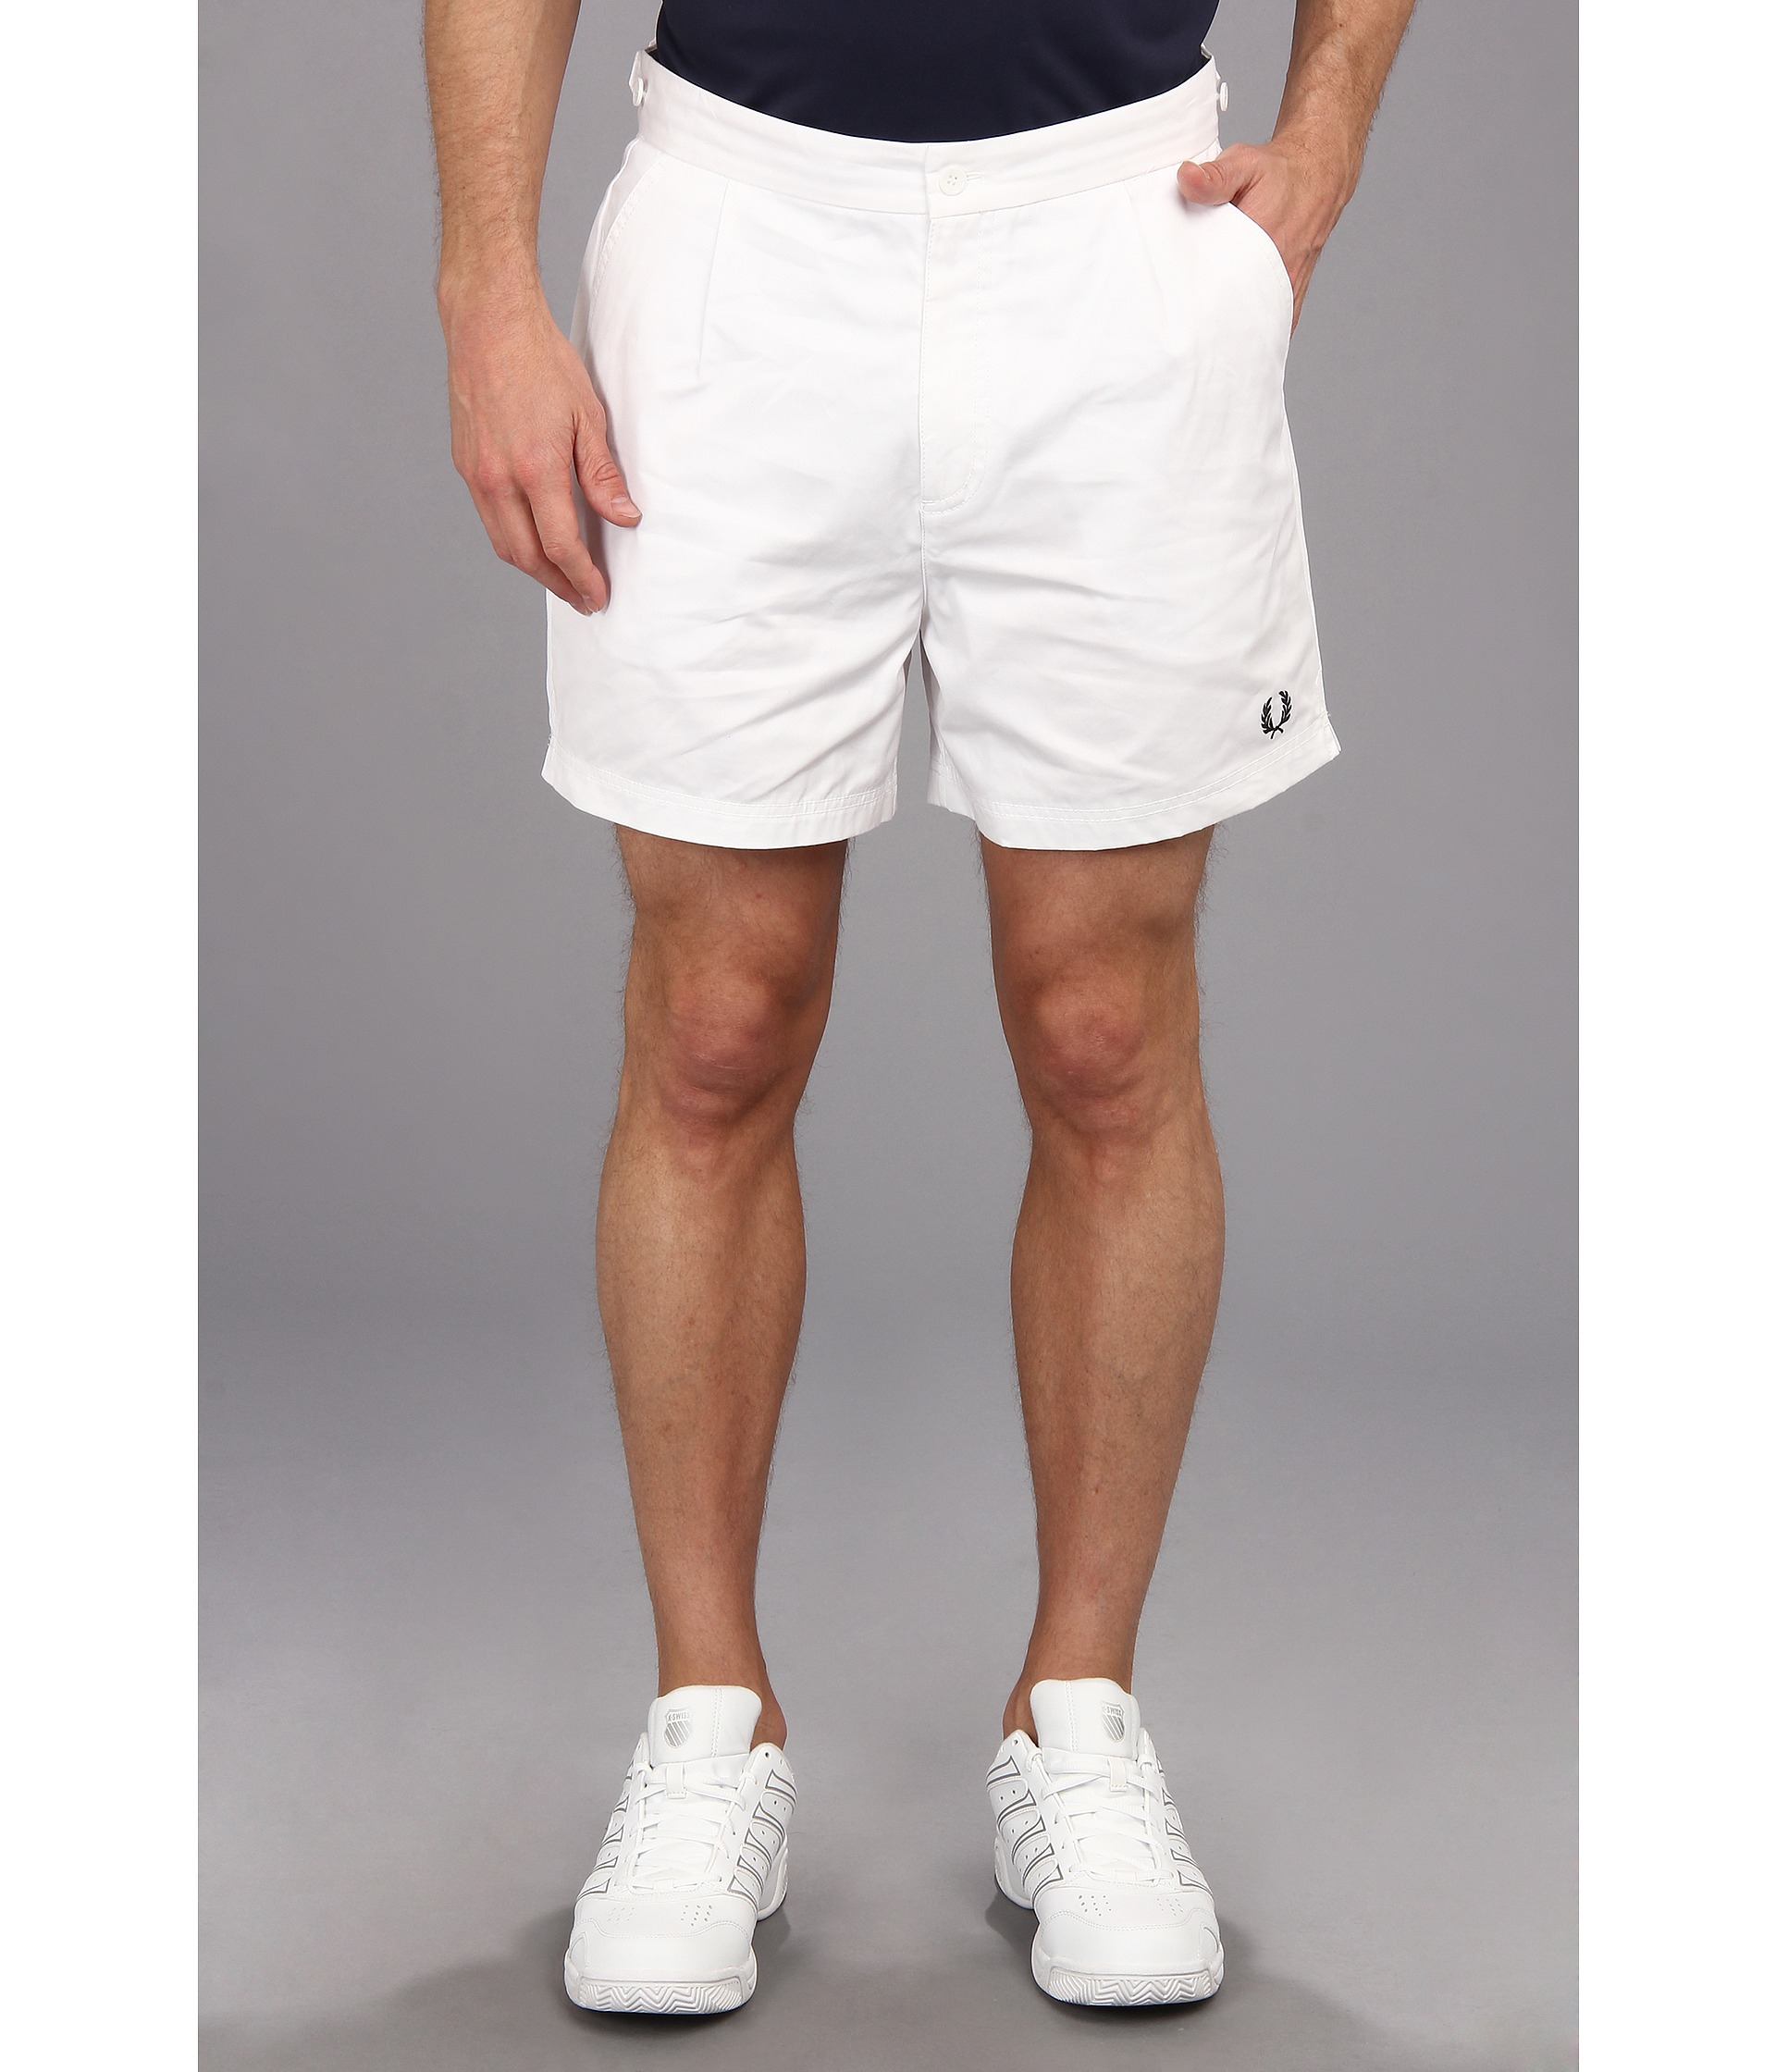 Lyst - Fred Perry Tailored Tennis Shorts in White for Men